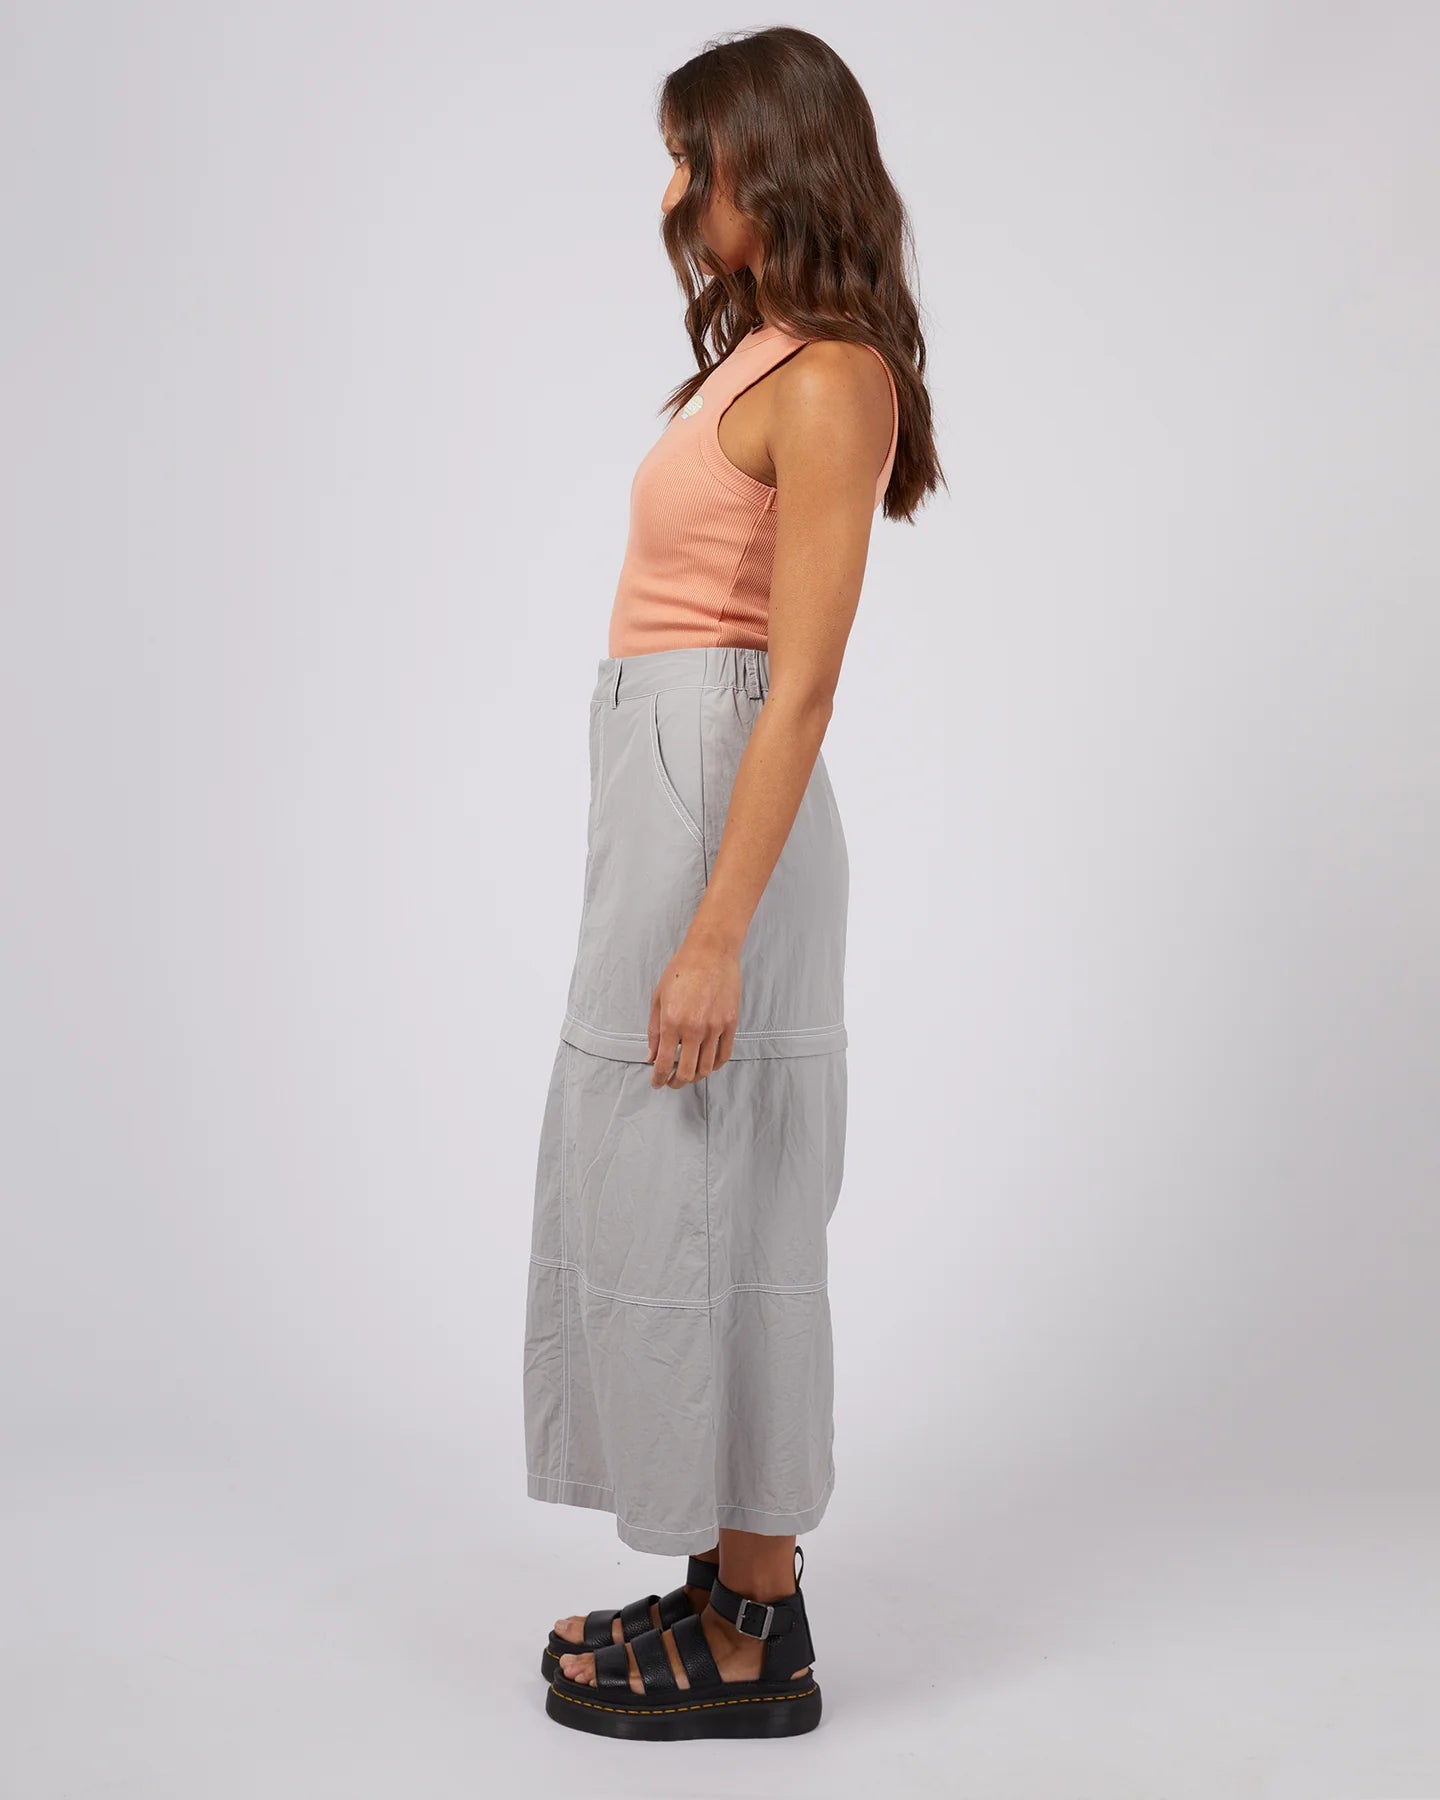 SILENT THEORY Ace Contrast Womens Skirt - Grey